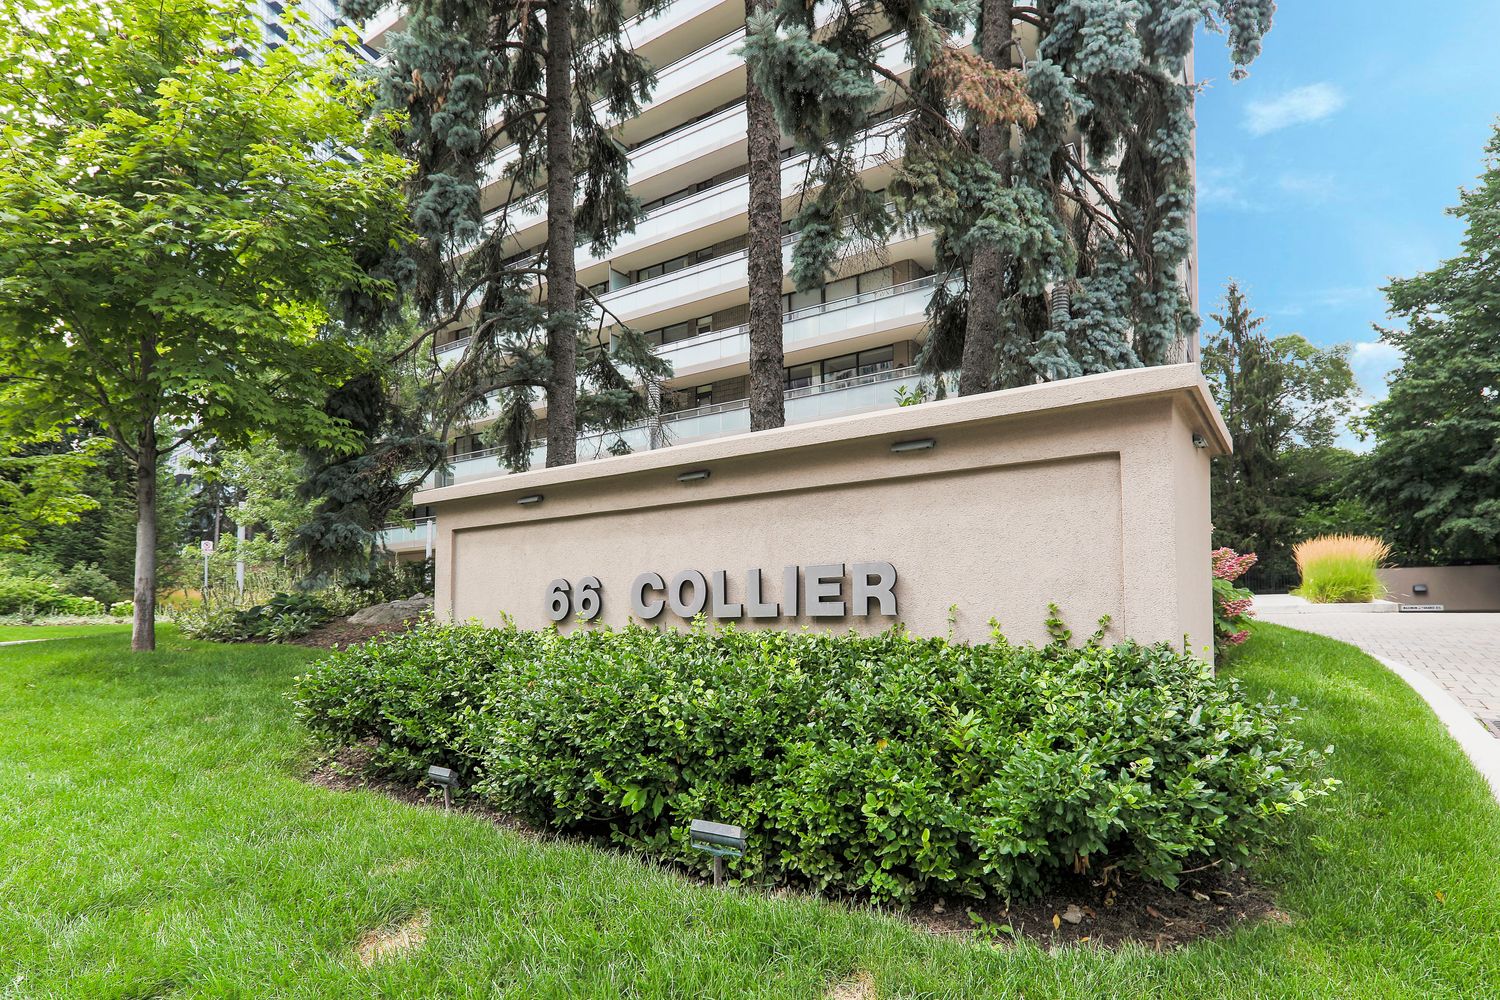 66 Collier Street. 66 Collier Condos is located in  Downtown, Toronto - image #5 of 5